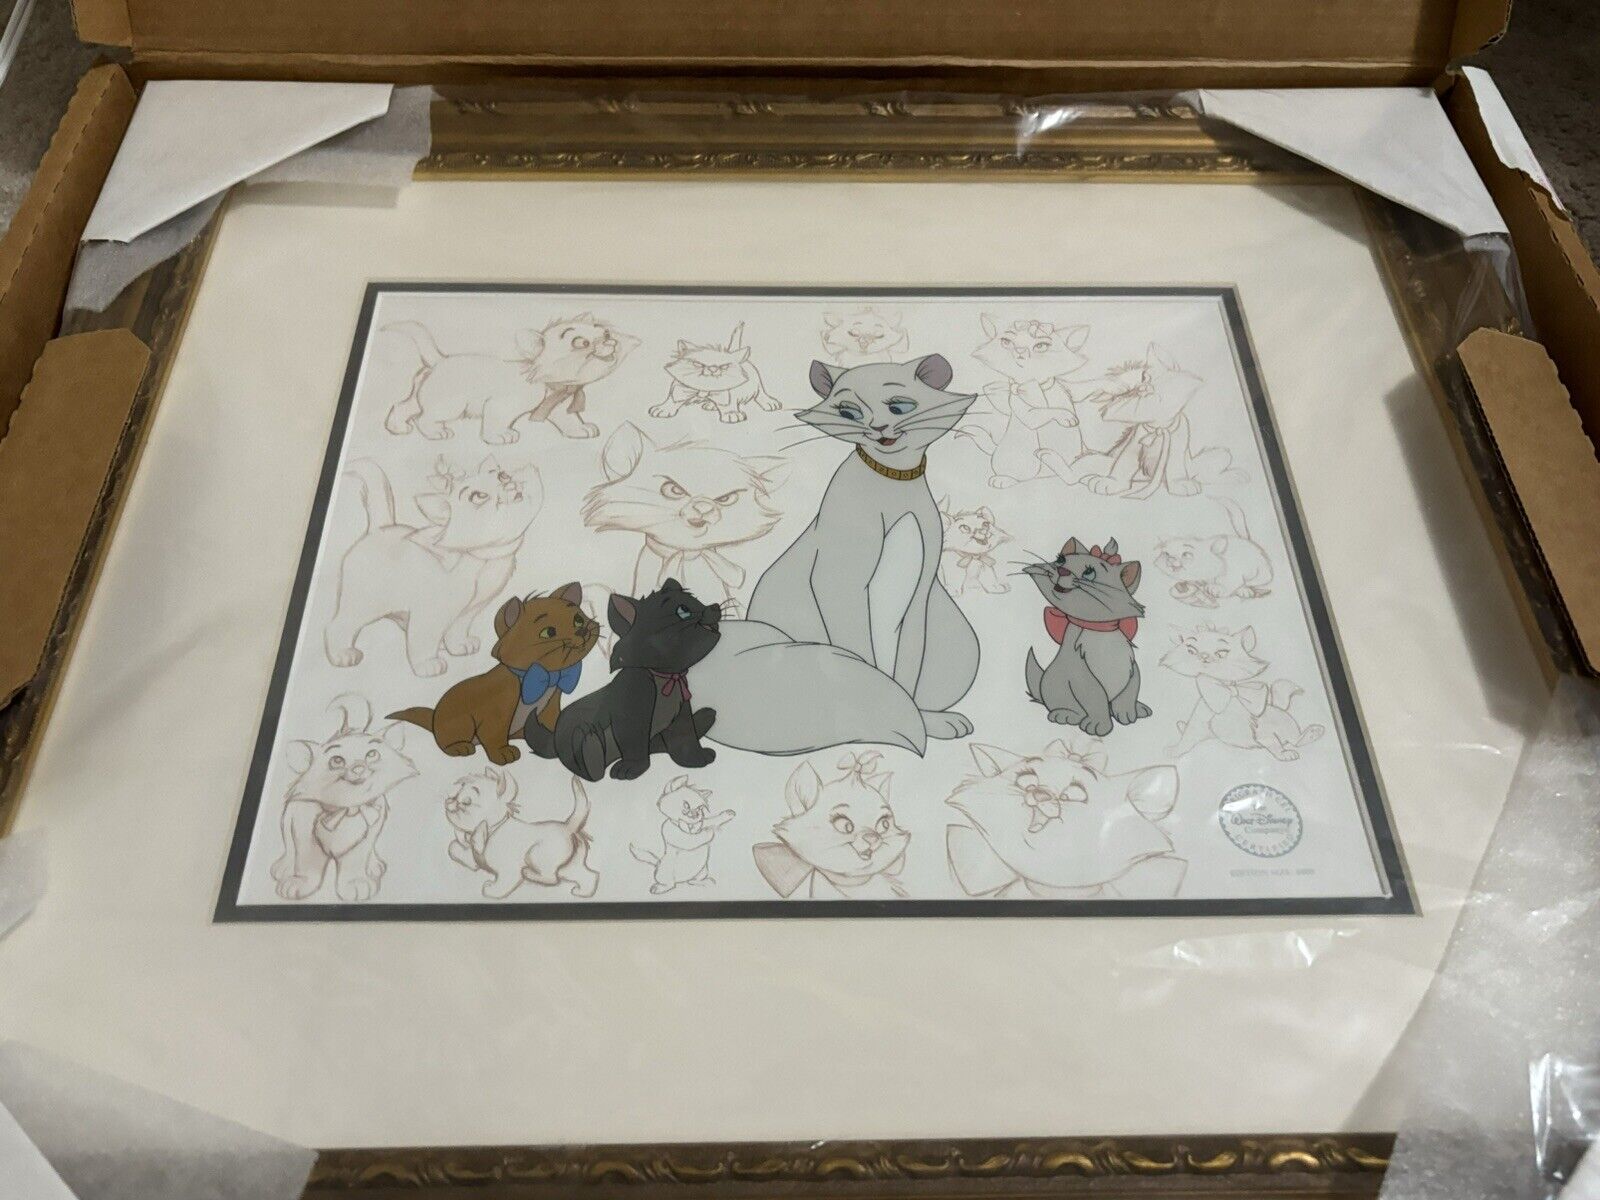 Disney Aristocats Special Edition Duchess and her Kittens Brand New frame